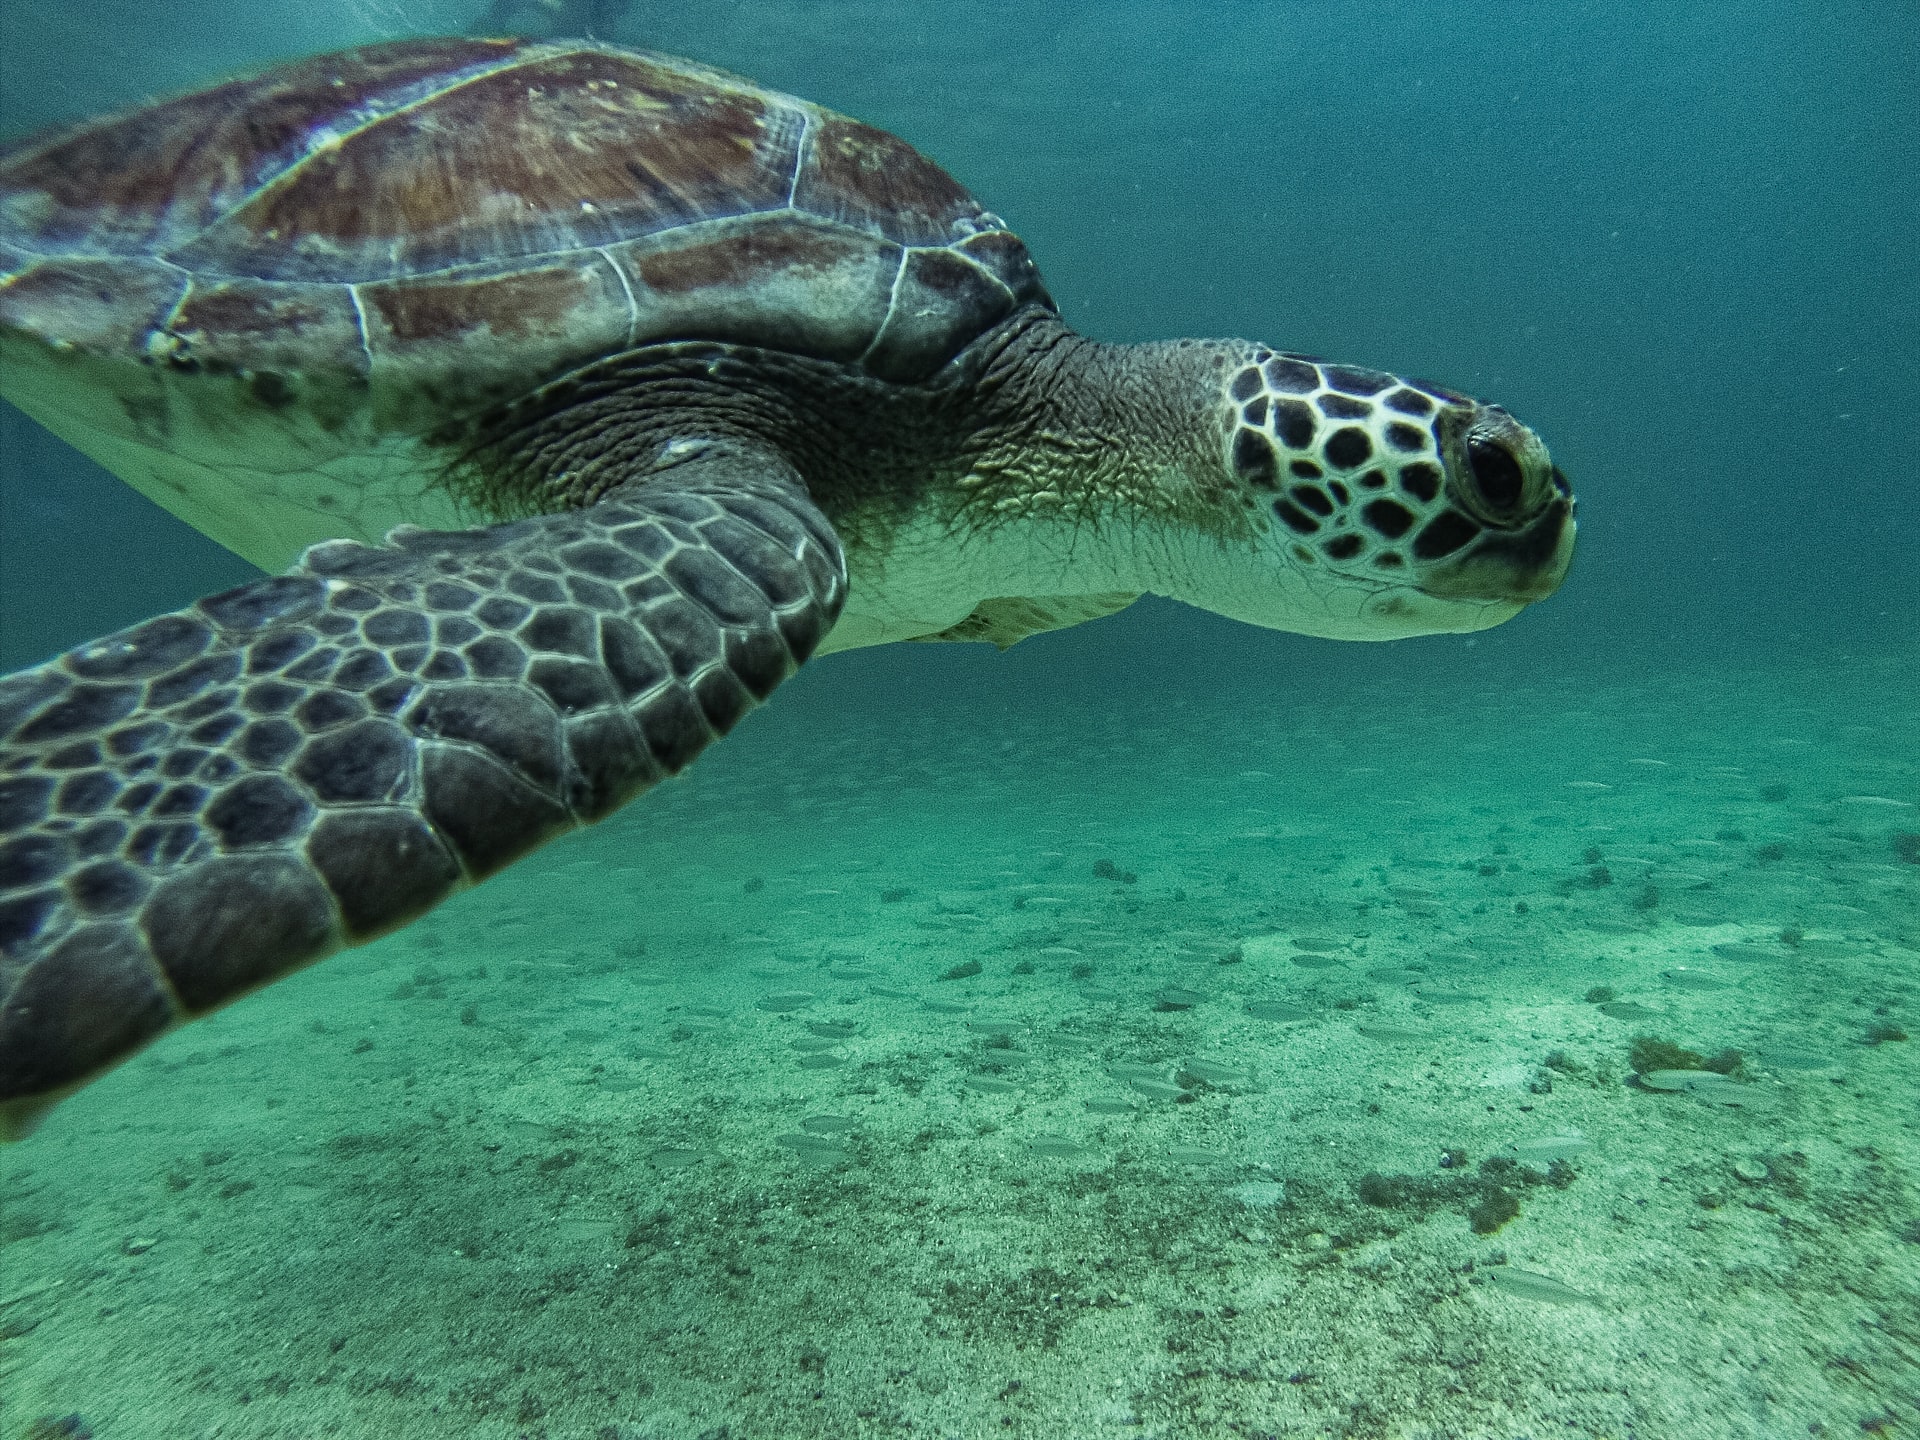 Instead of killing a turtle to sell its body parts, the country could now use the species to attract tourism, a much more sustainable and low-impact source of profit.